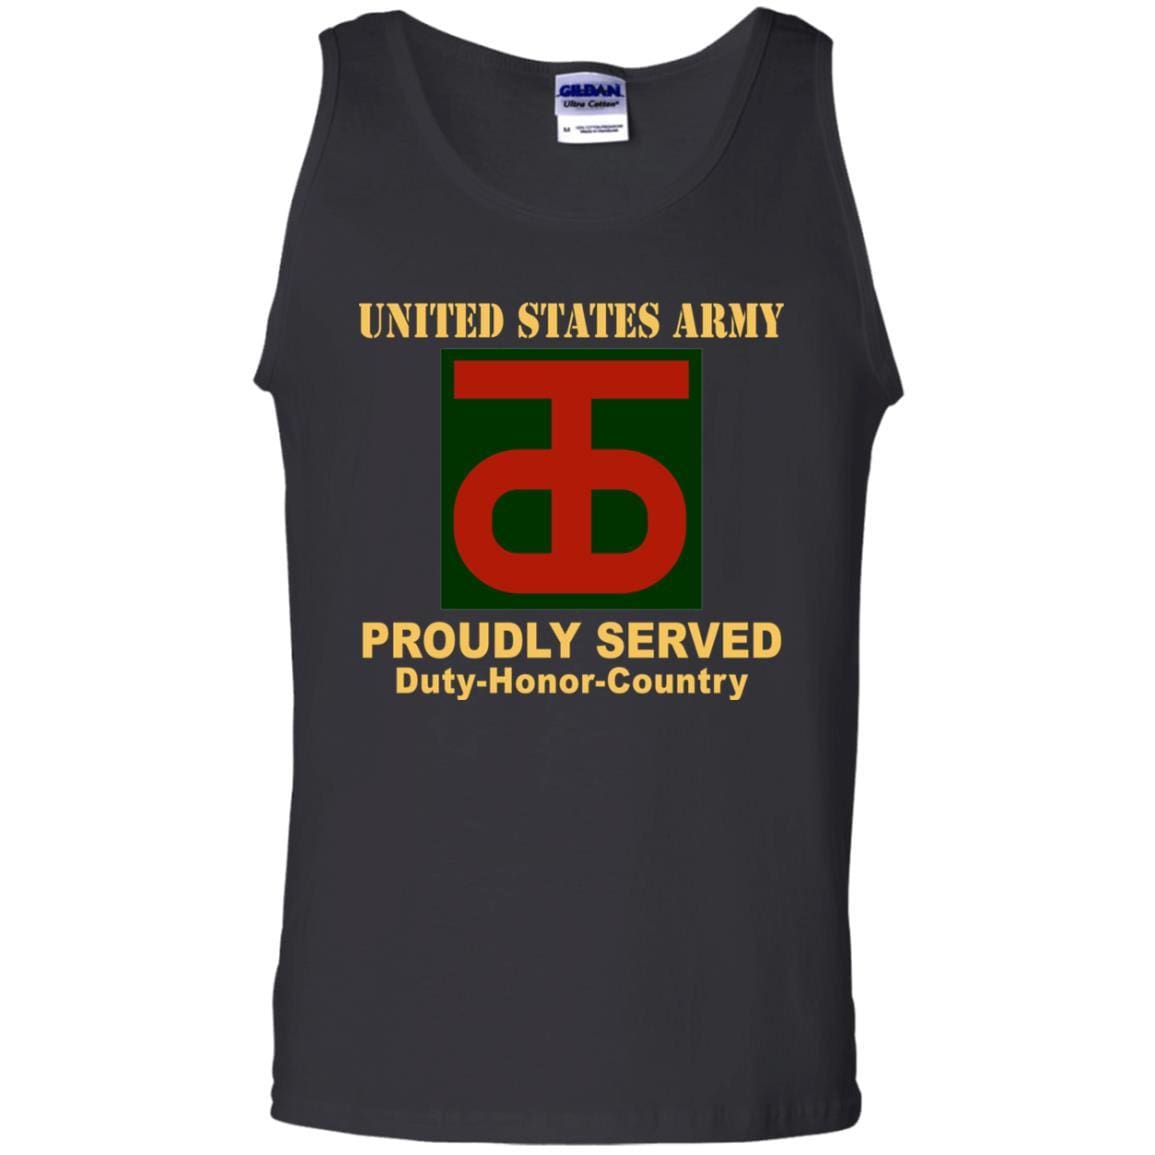 US ARMY 90 SUSTAINMENT BRIGADE - Proudly Served T-Shirt On Front For Men-TShirt-Army-Veterans Nation